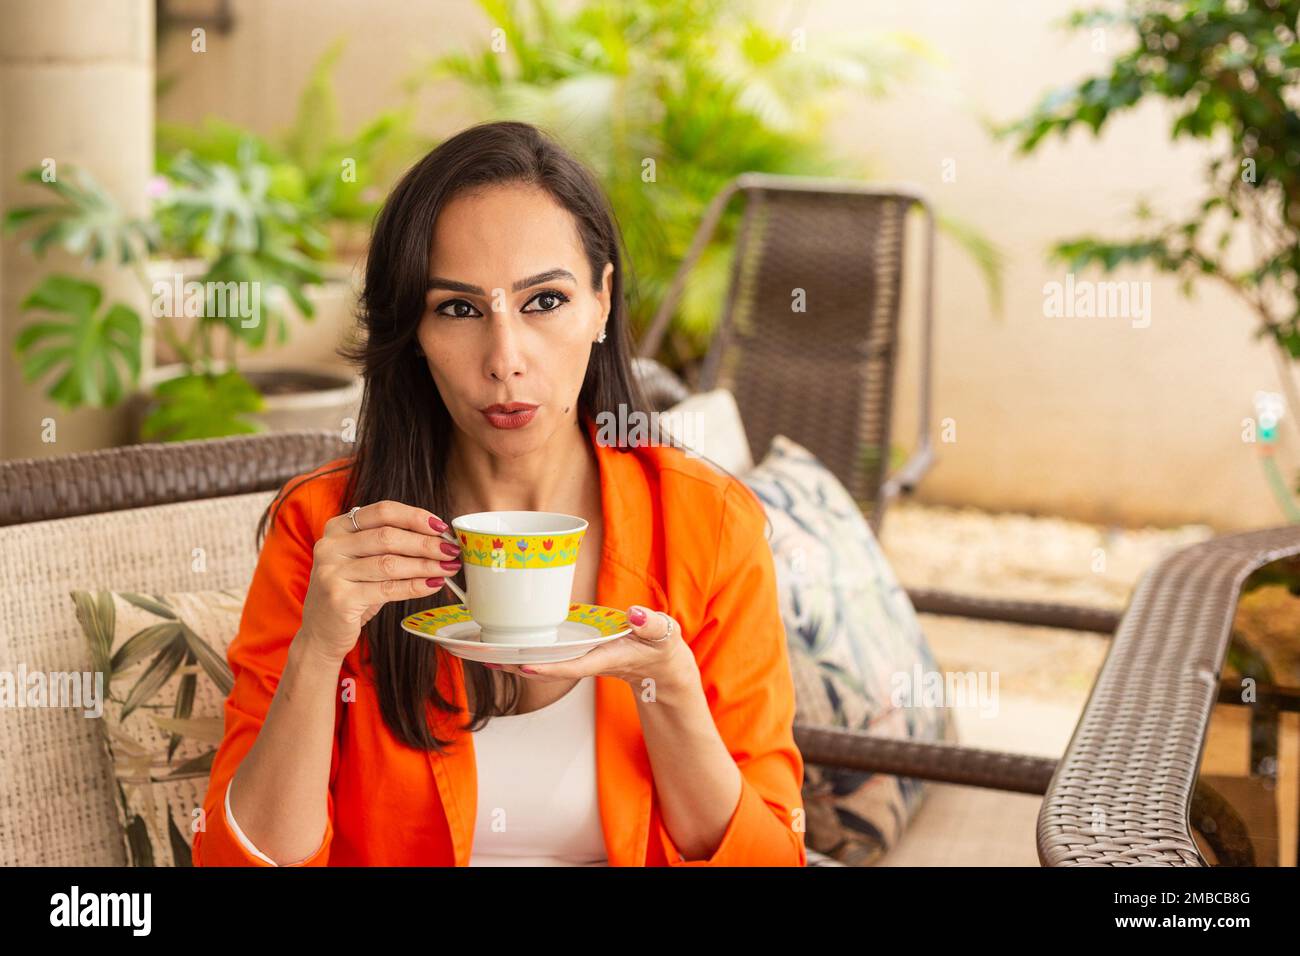 Goiania, Goiás, Brazil – January 10, 2023: A young woman, having tea, sitting in a chair with a calm expression, on the porch of her house. Stock Photo